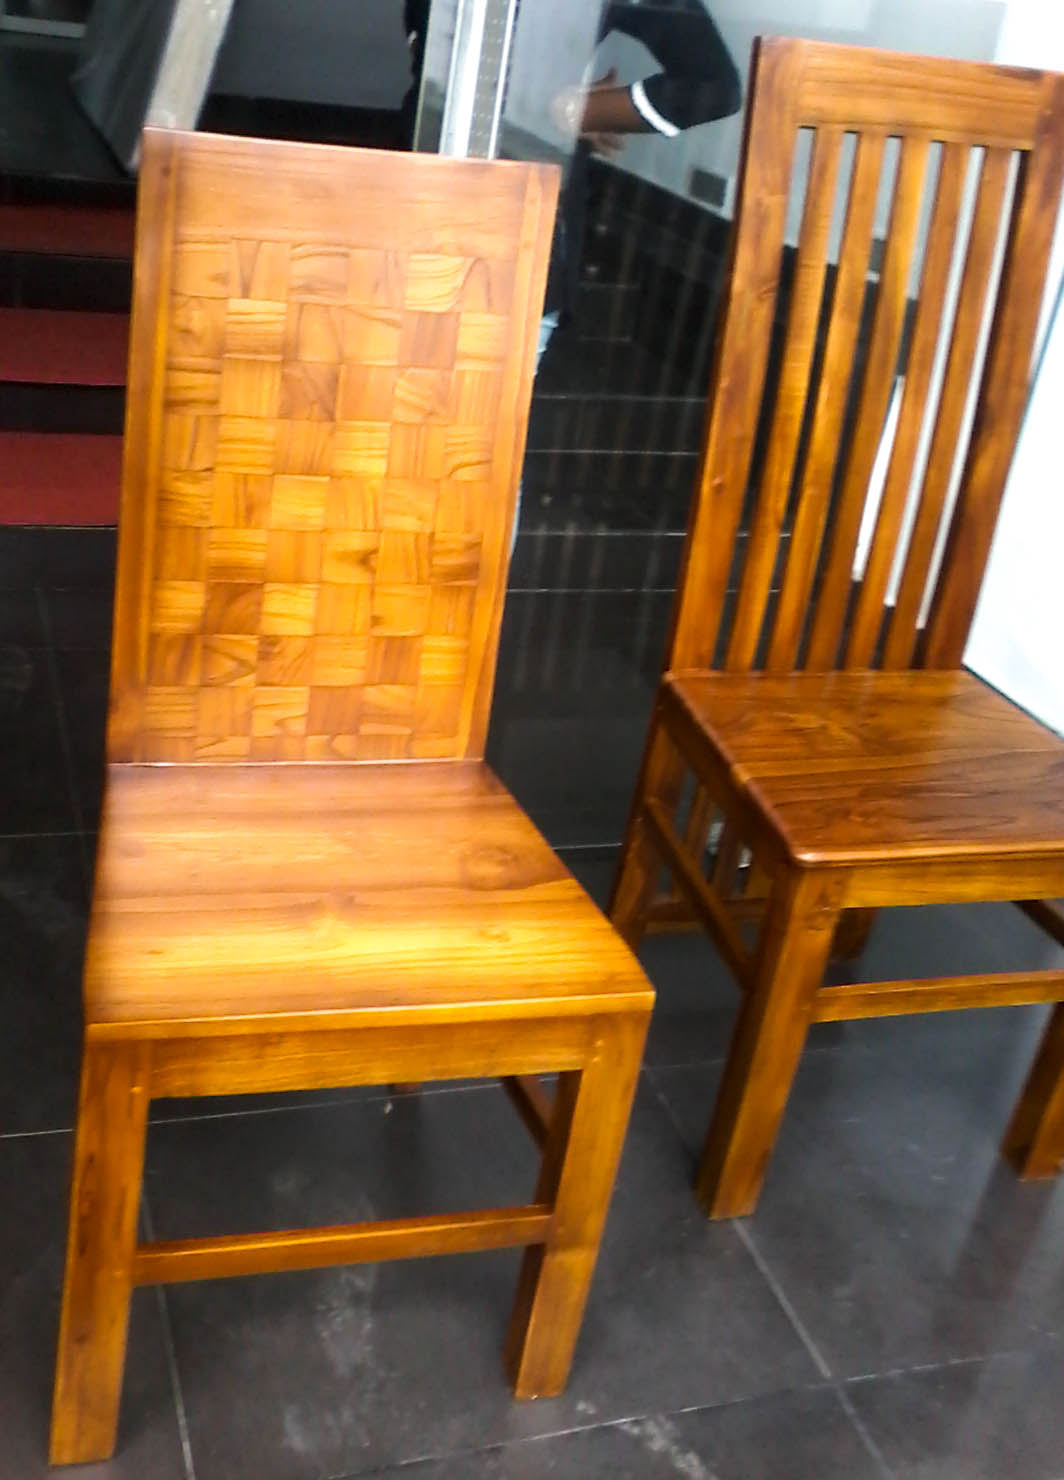 SHAN LANKA FURNITURE: Dining Table Chairs